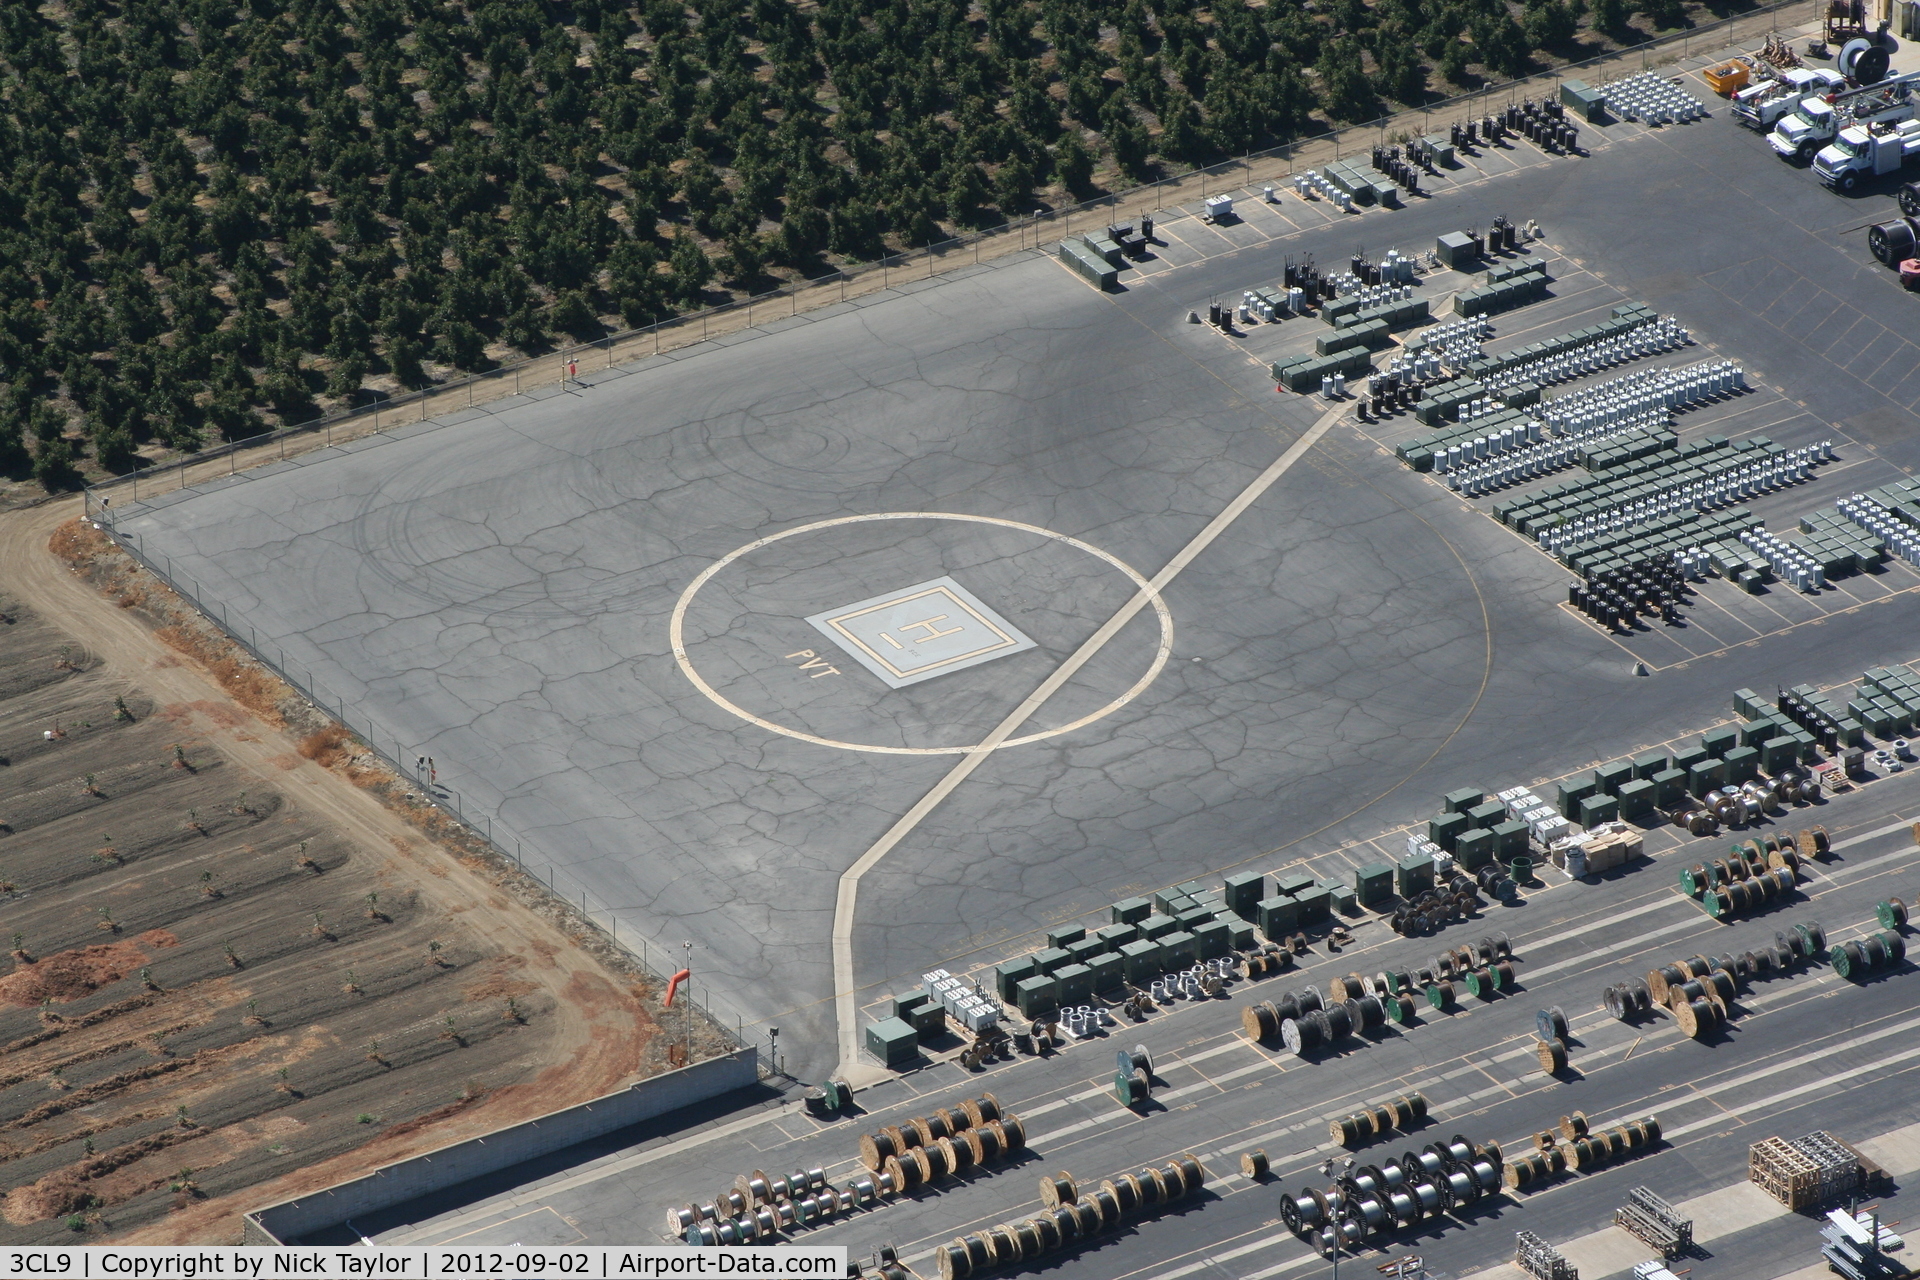 Sce Northern Division Heliport (3CL9) - Southern California Edison